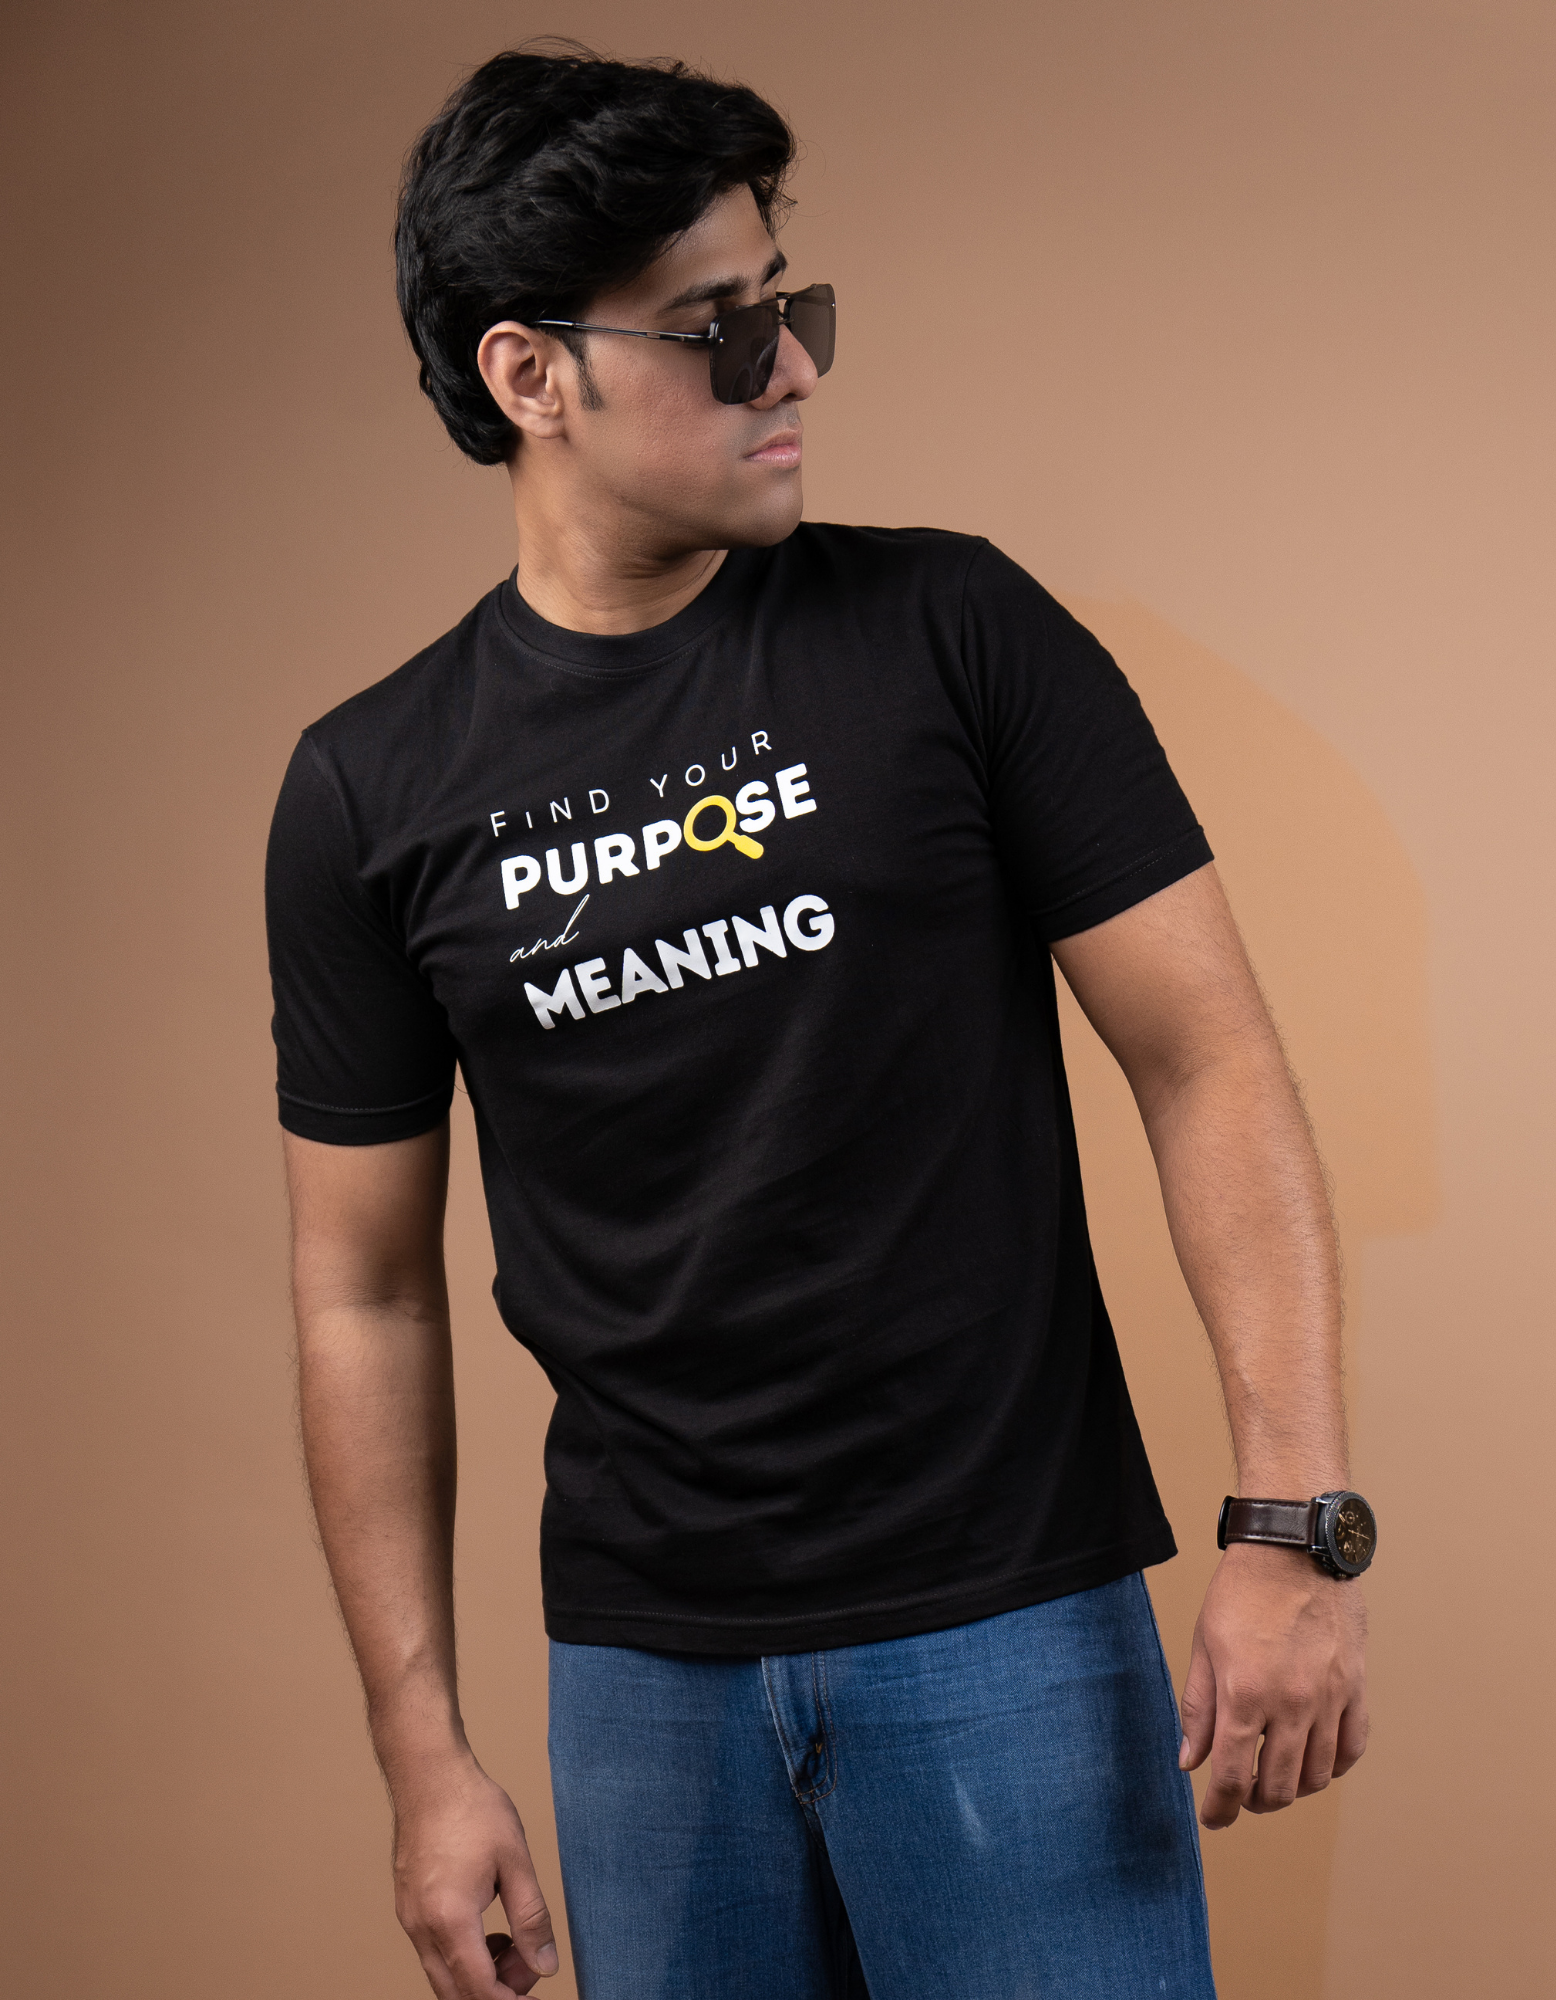 Find your purpose & meaning T-shirt front view